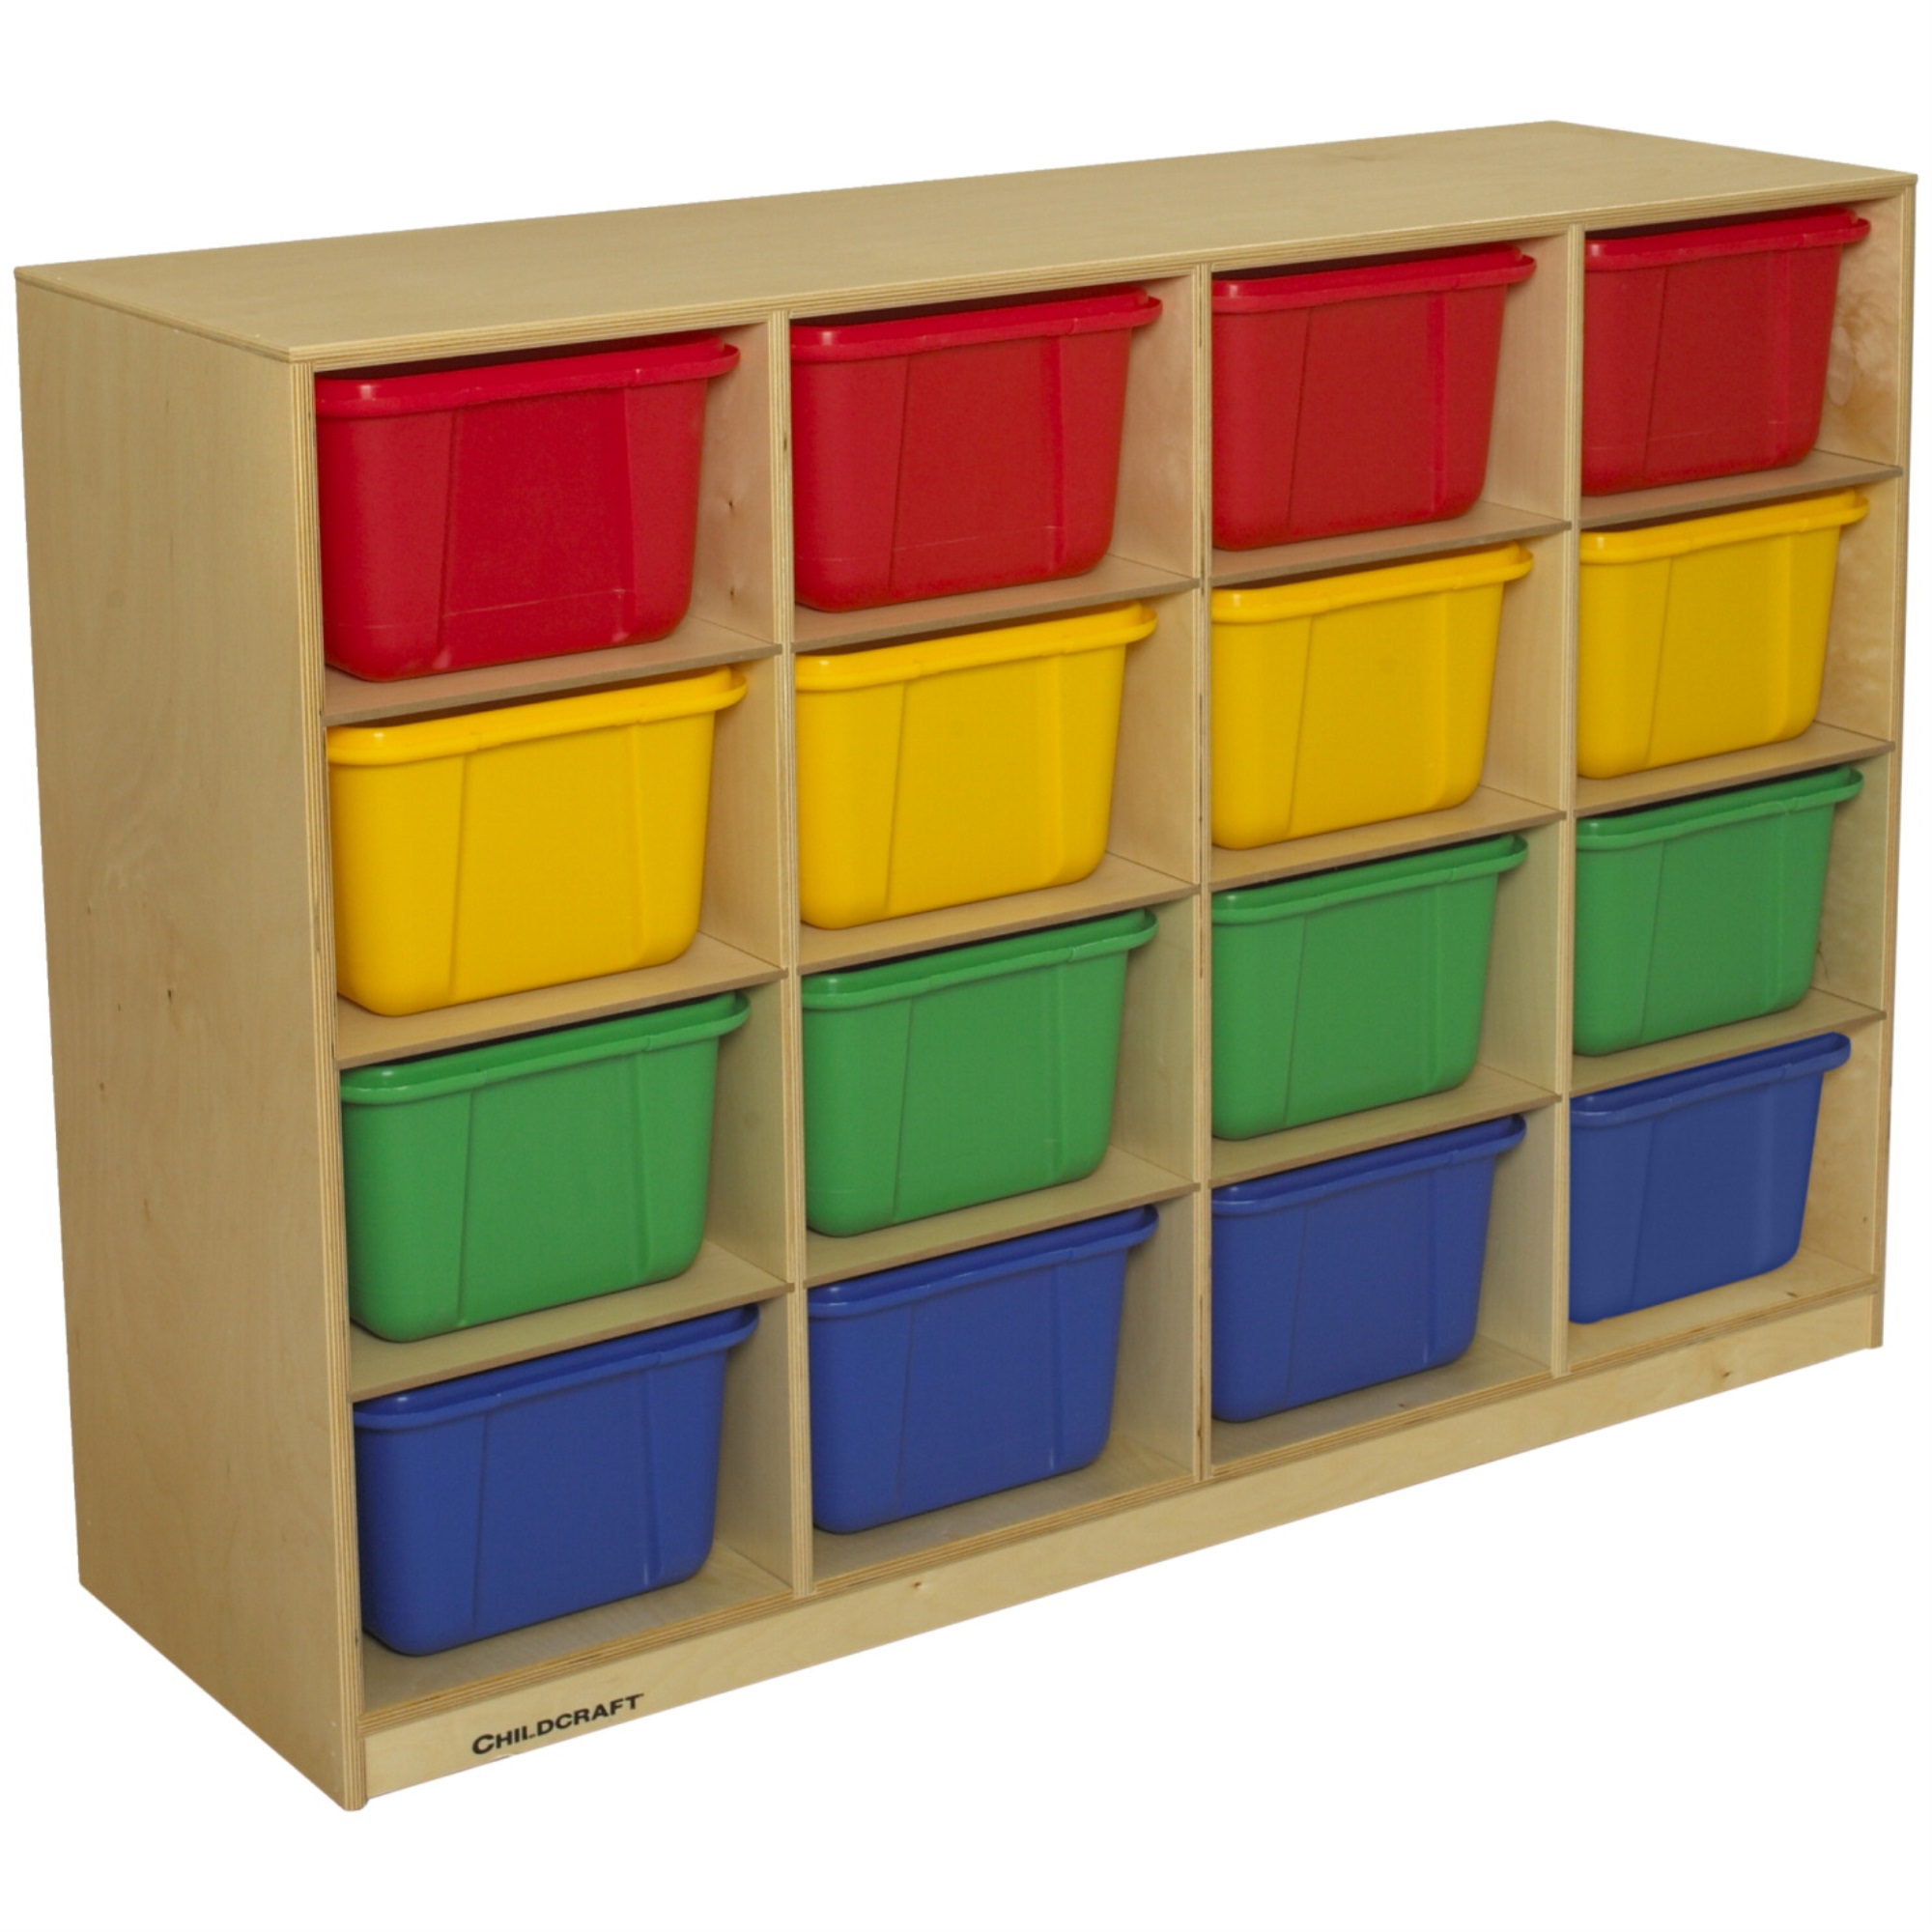 Childcraft Mobile Cubby Unit, 16 Assorted Color Tubs, 50-5/8 x 16 x 36 Inches